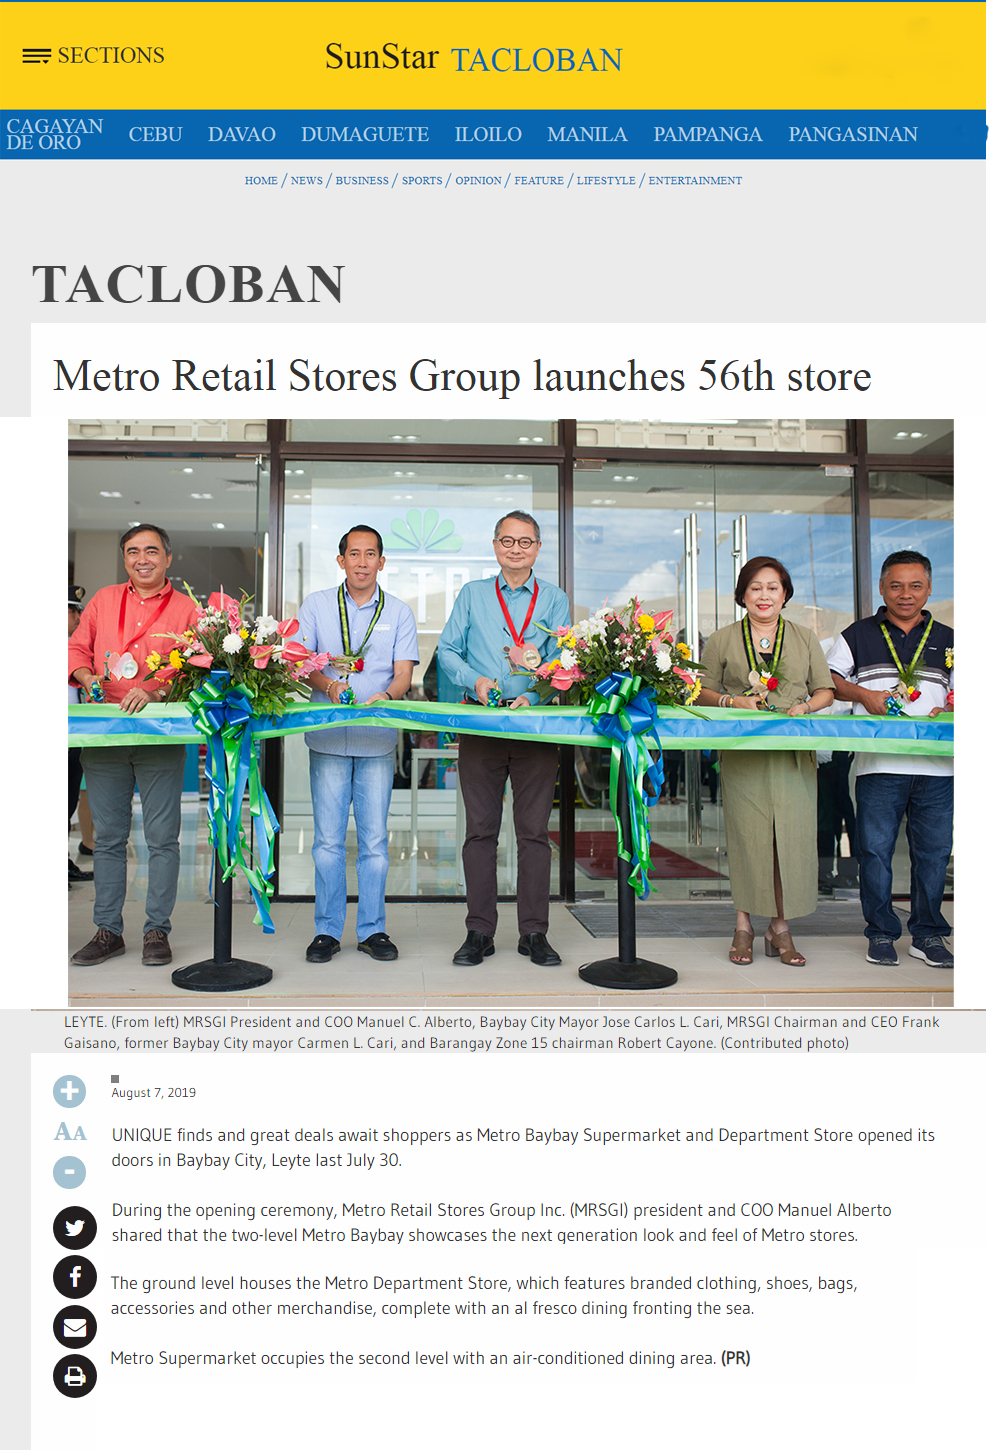 August 7 2019 Metro Retail Stores Group launches 56th store Sun Star Networkwww.sunstar.com.ph with link